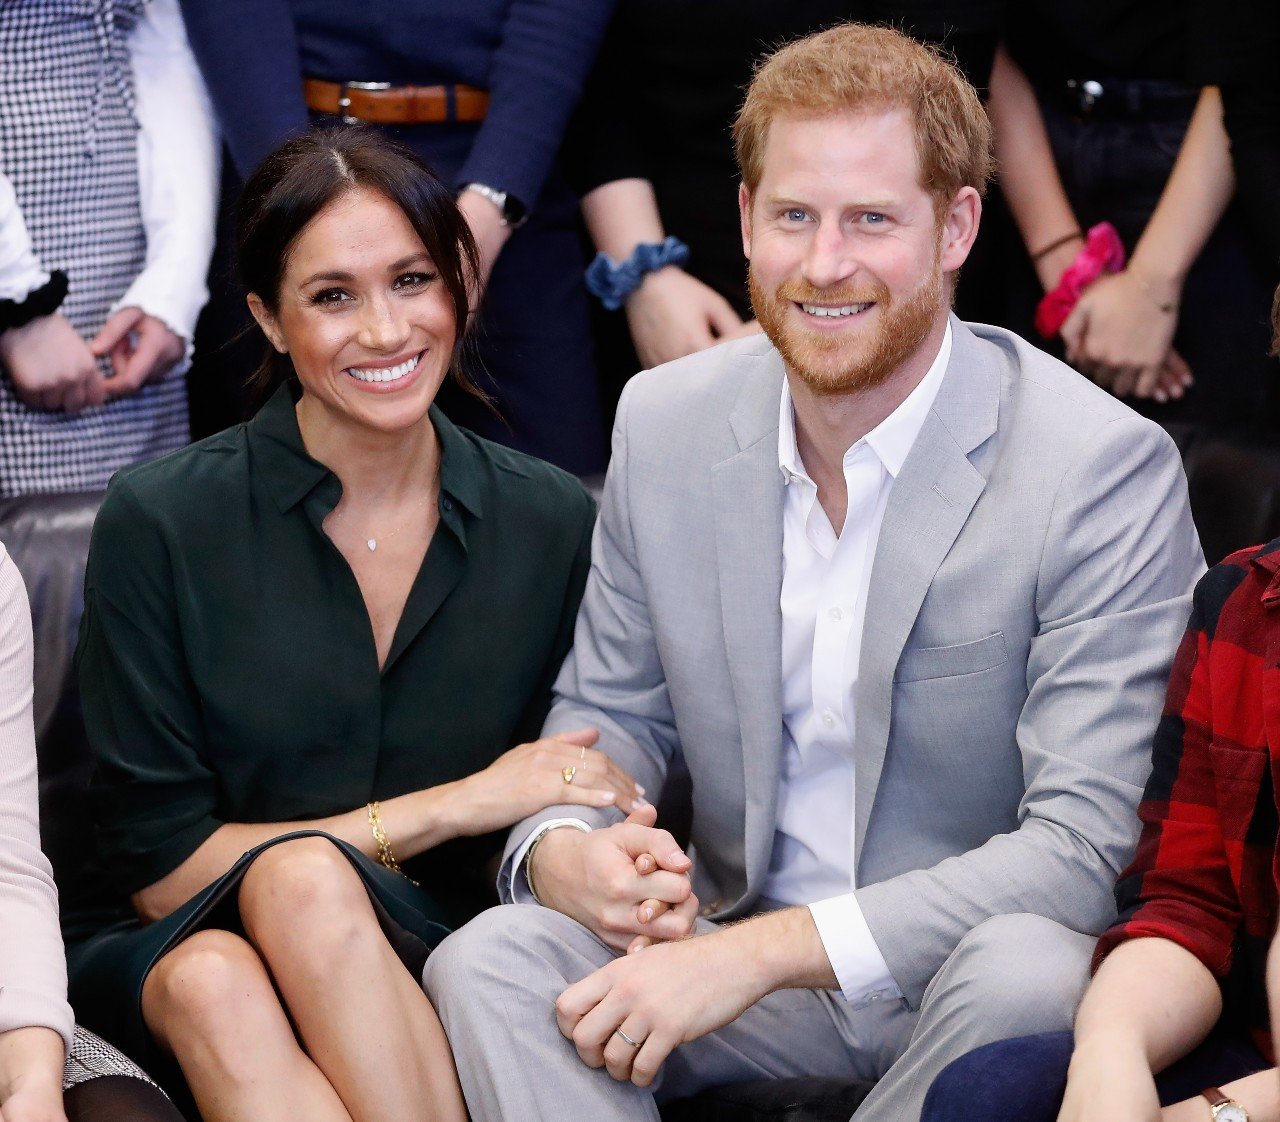 Meghan Markle and Prince Harry sit next to each other and smile.